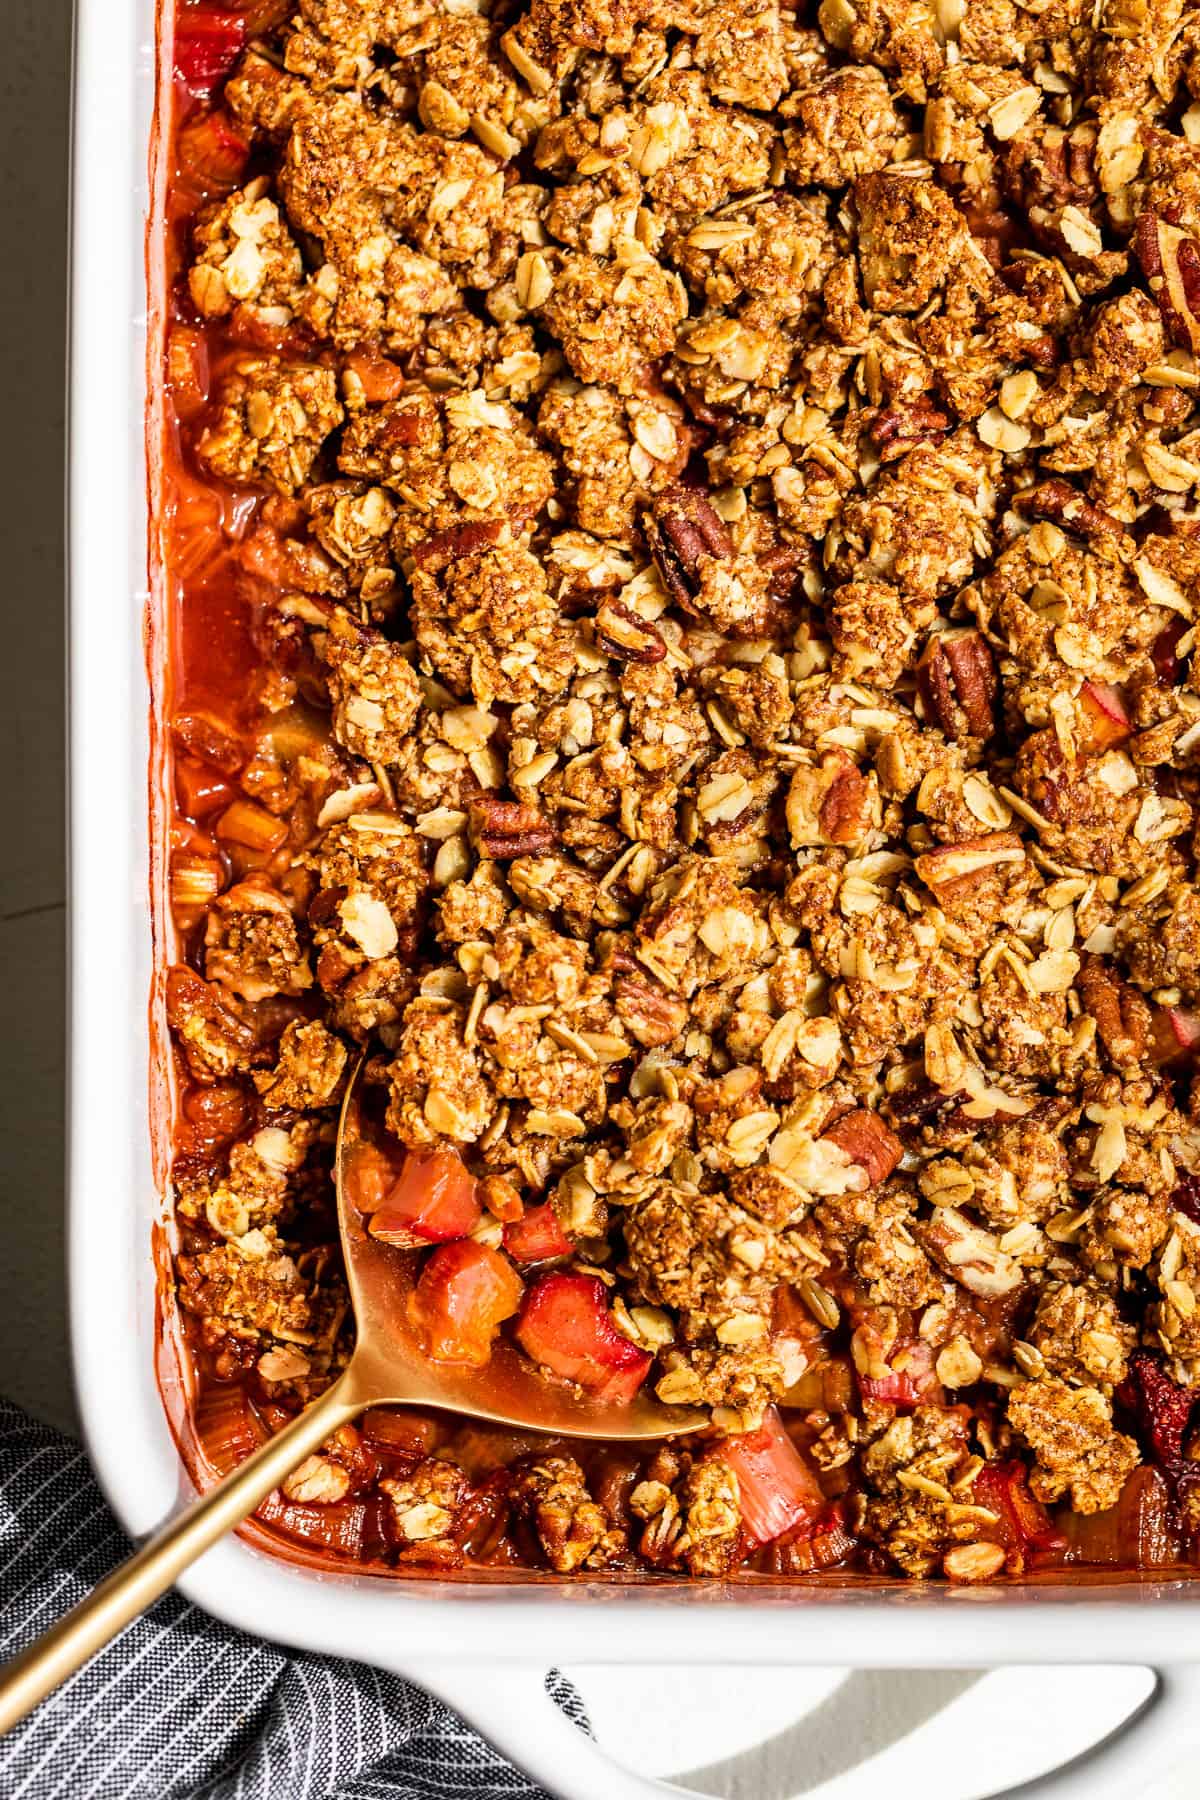 The finished Strawberry Rhubarb Crisp in a white baking dish with a gold serving spoon.